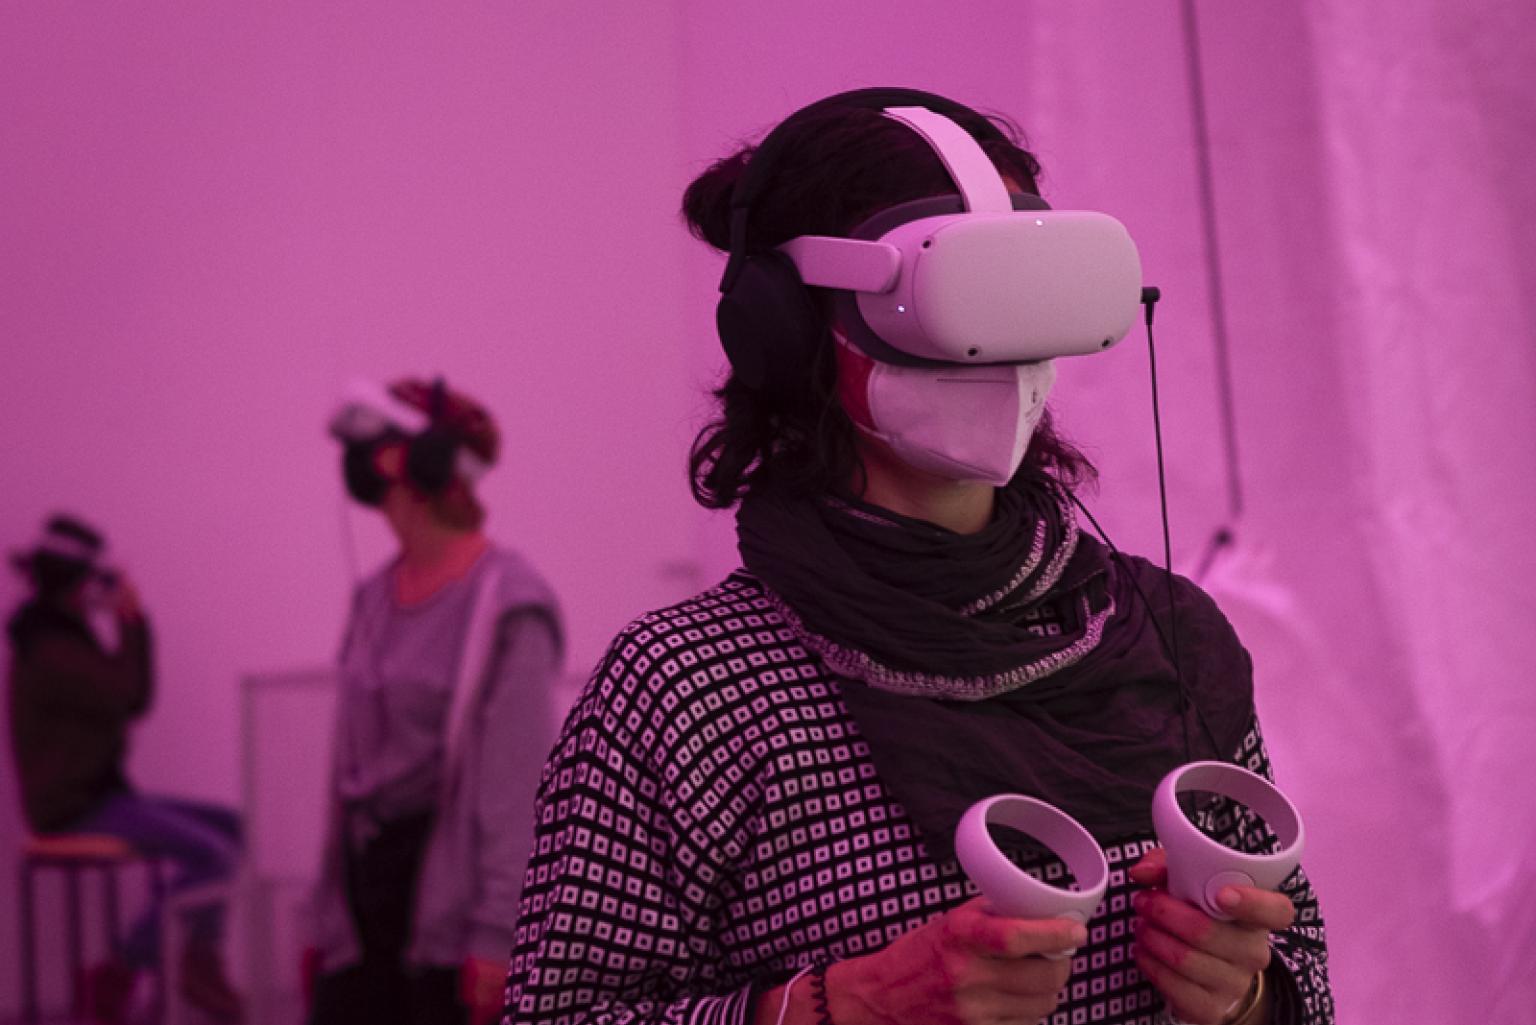 A woman wearing a VR head set and holding two hand controllers in her hands stands in a pink room. In the background another person with a VR head set.